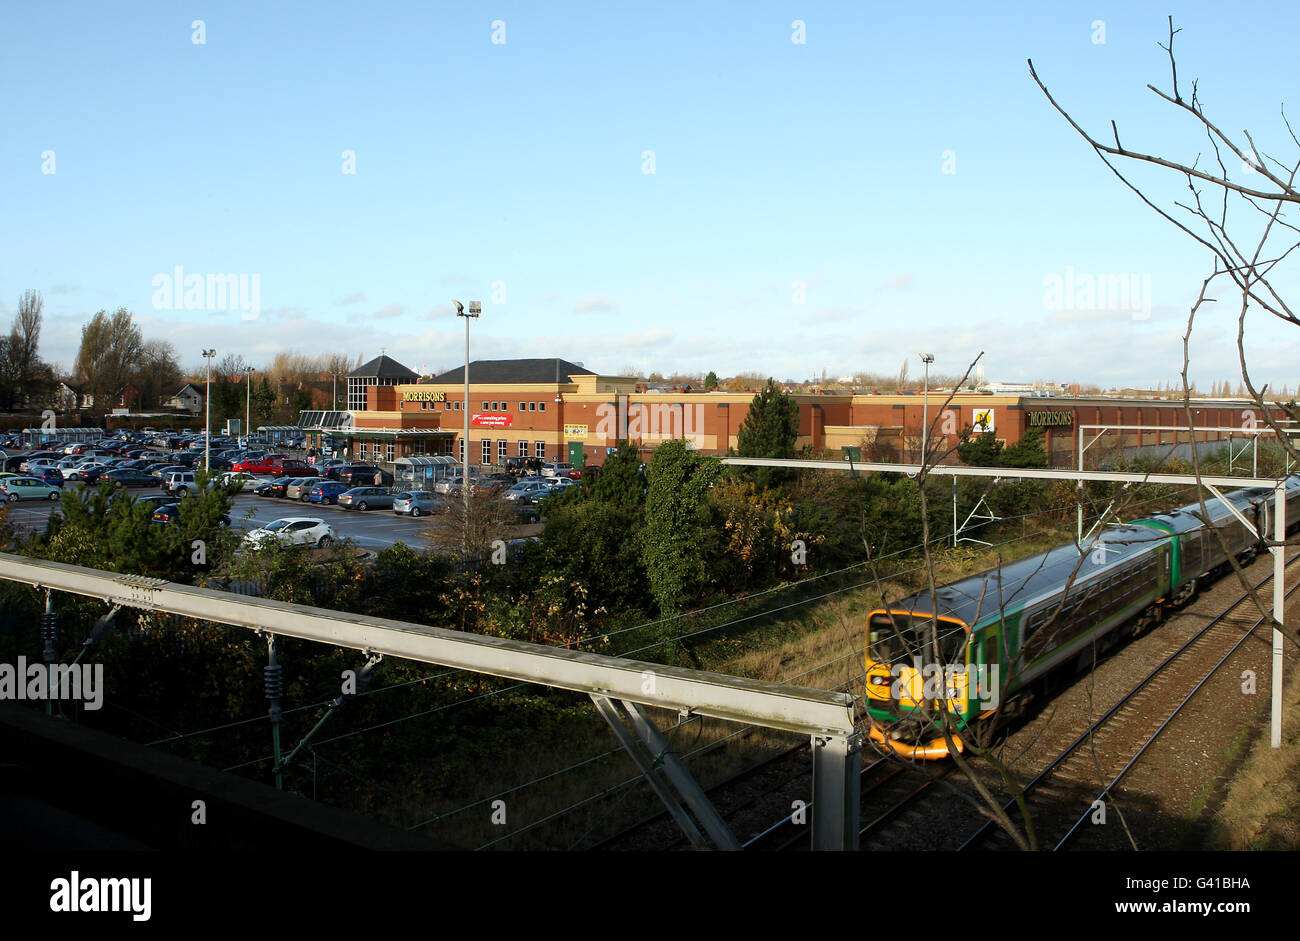 A general view of the site of the former home of Walsall Football Club, Fellows Park. Used by the club from 1886 until 1990 when the club moved to the current Bescot Stadium. The area is now the site of a Morrisons Supermarket development. Stock Photo